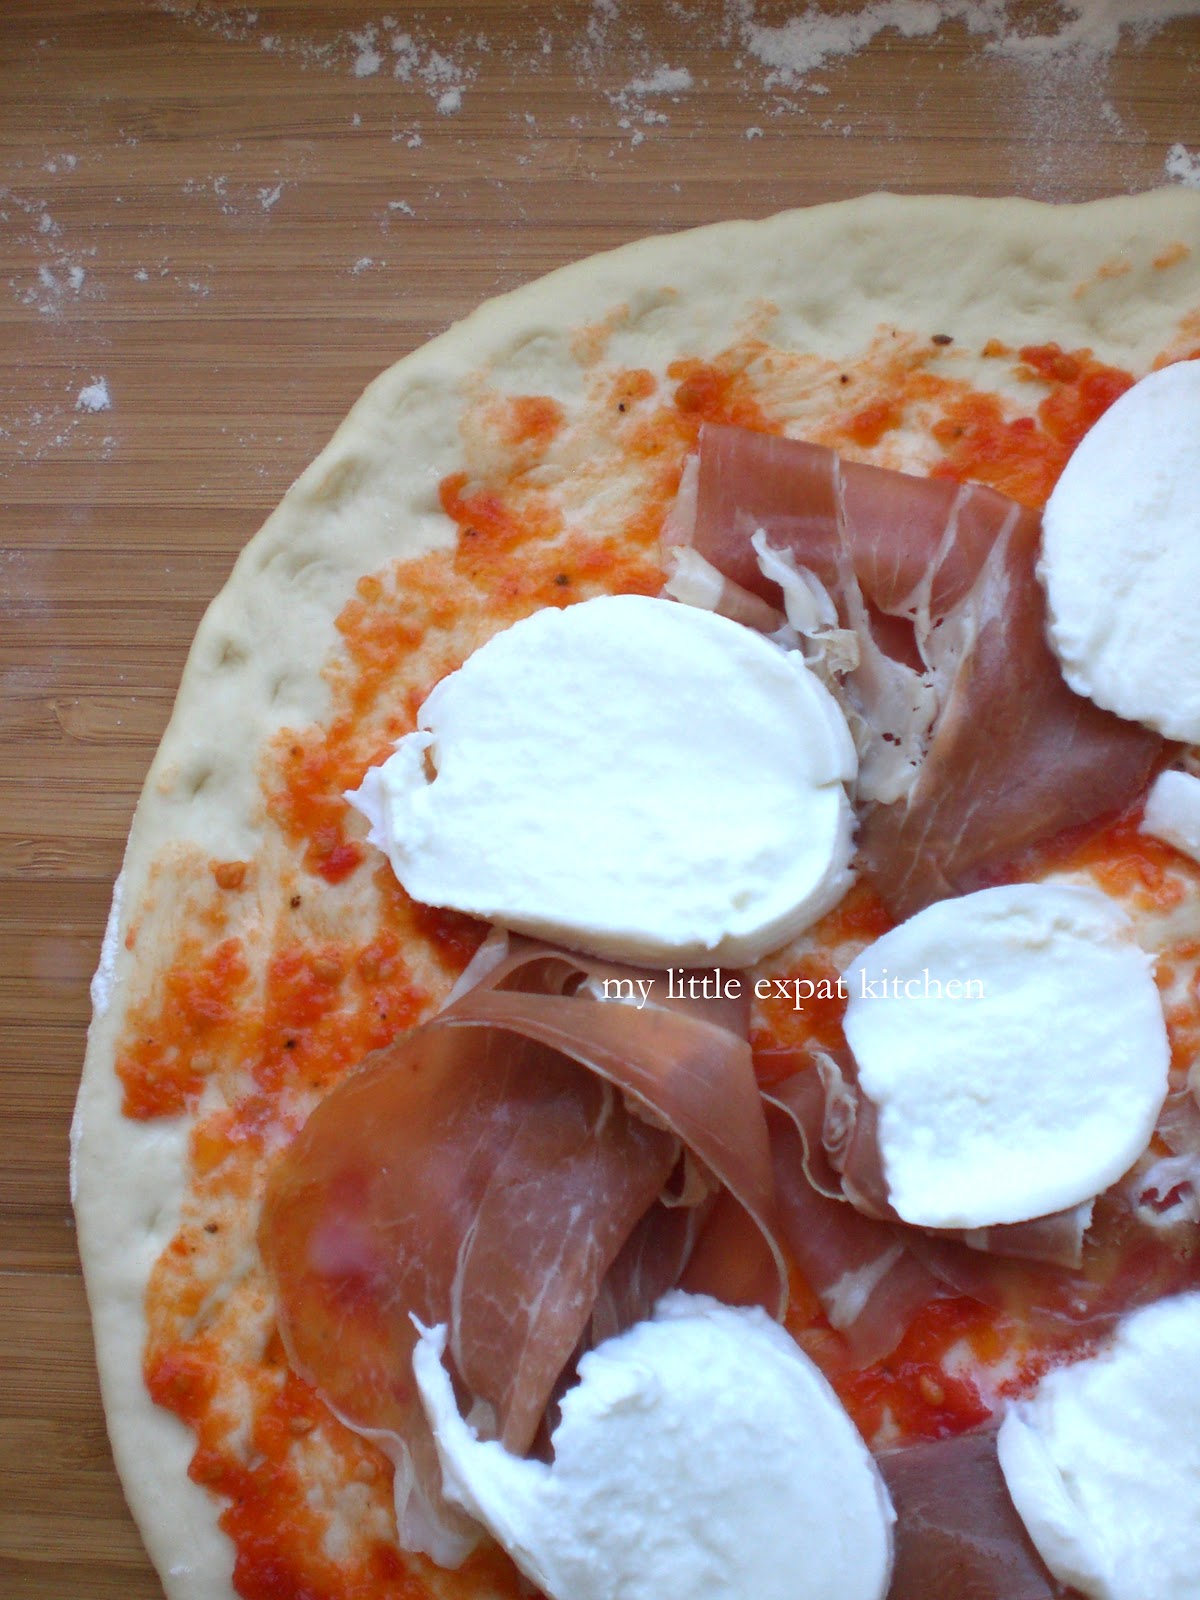 My Little Expat Kitchen: The Pizza, Part Three: 3 Pizzas